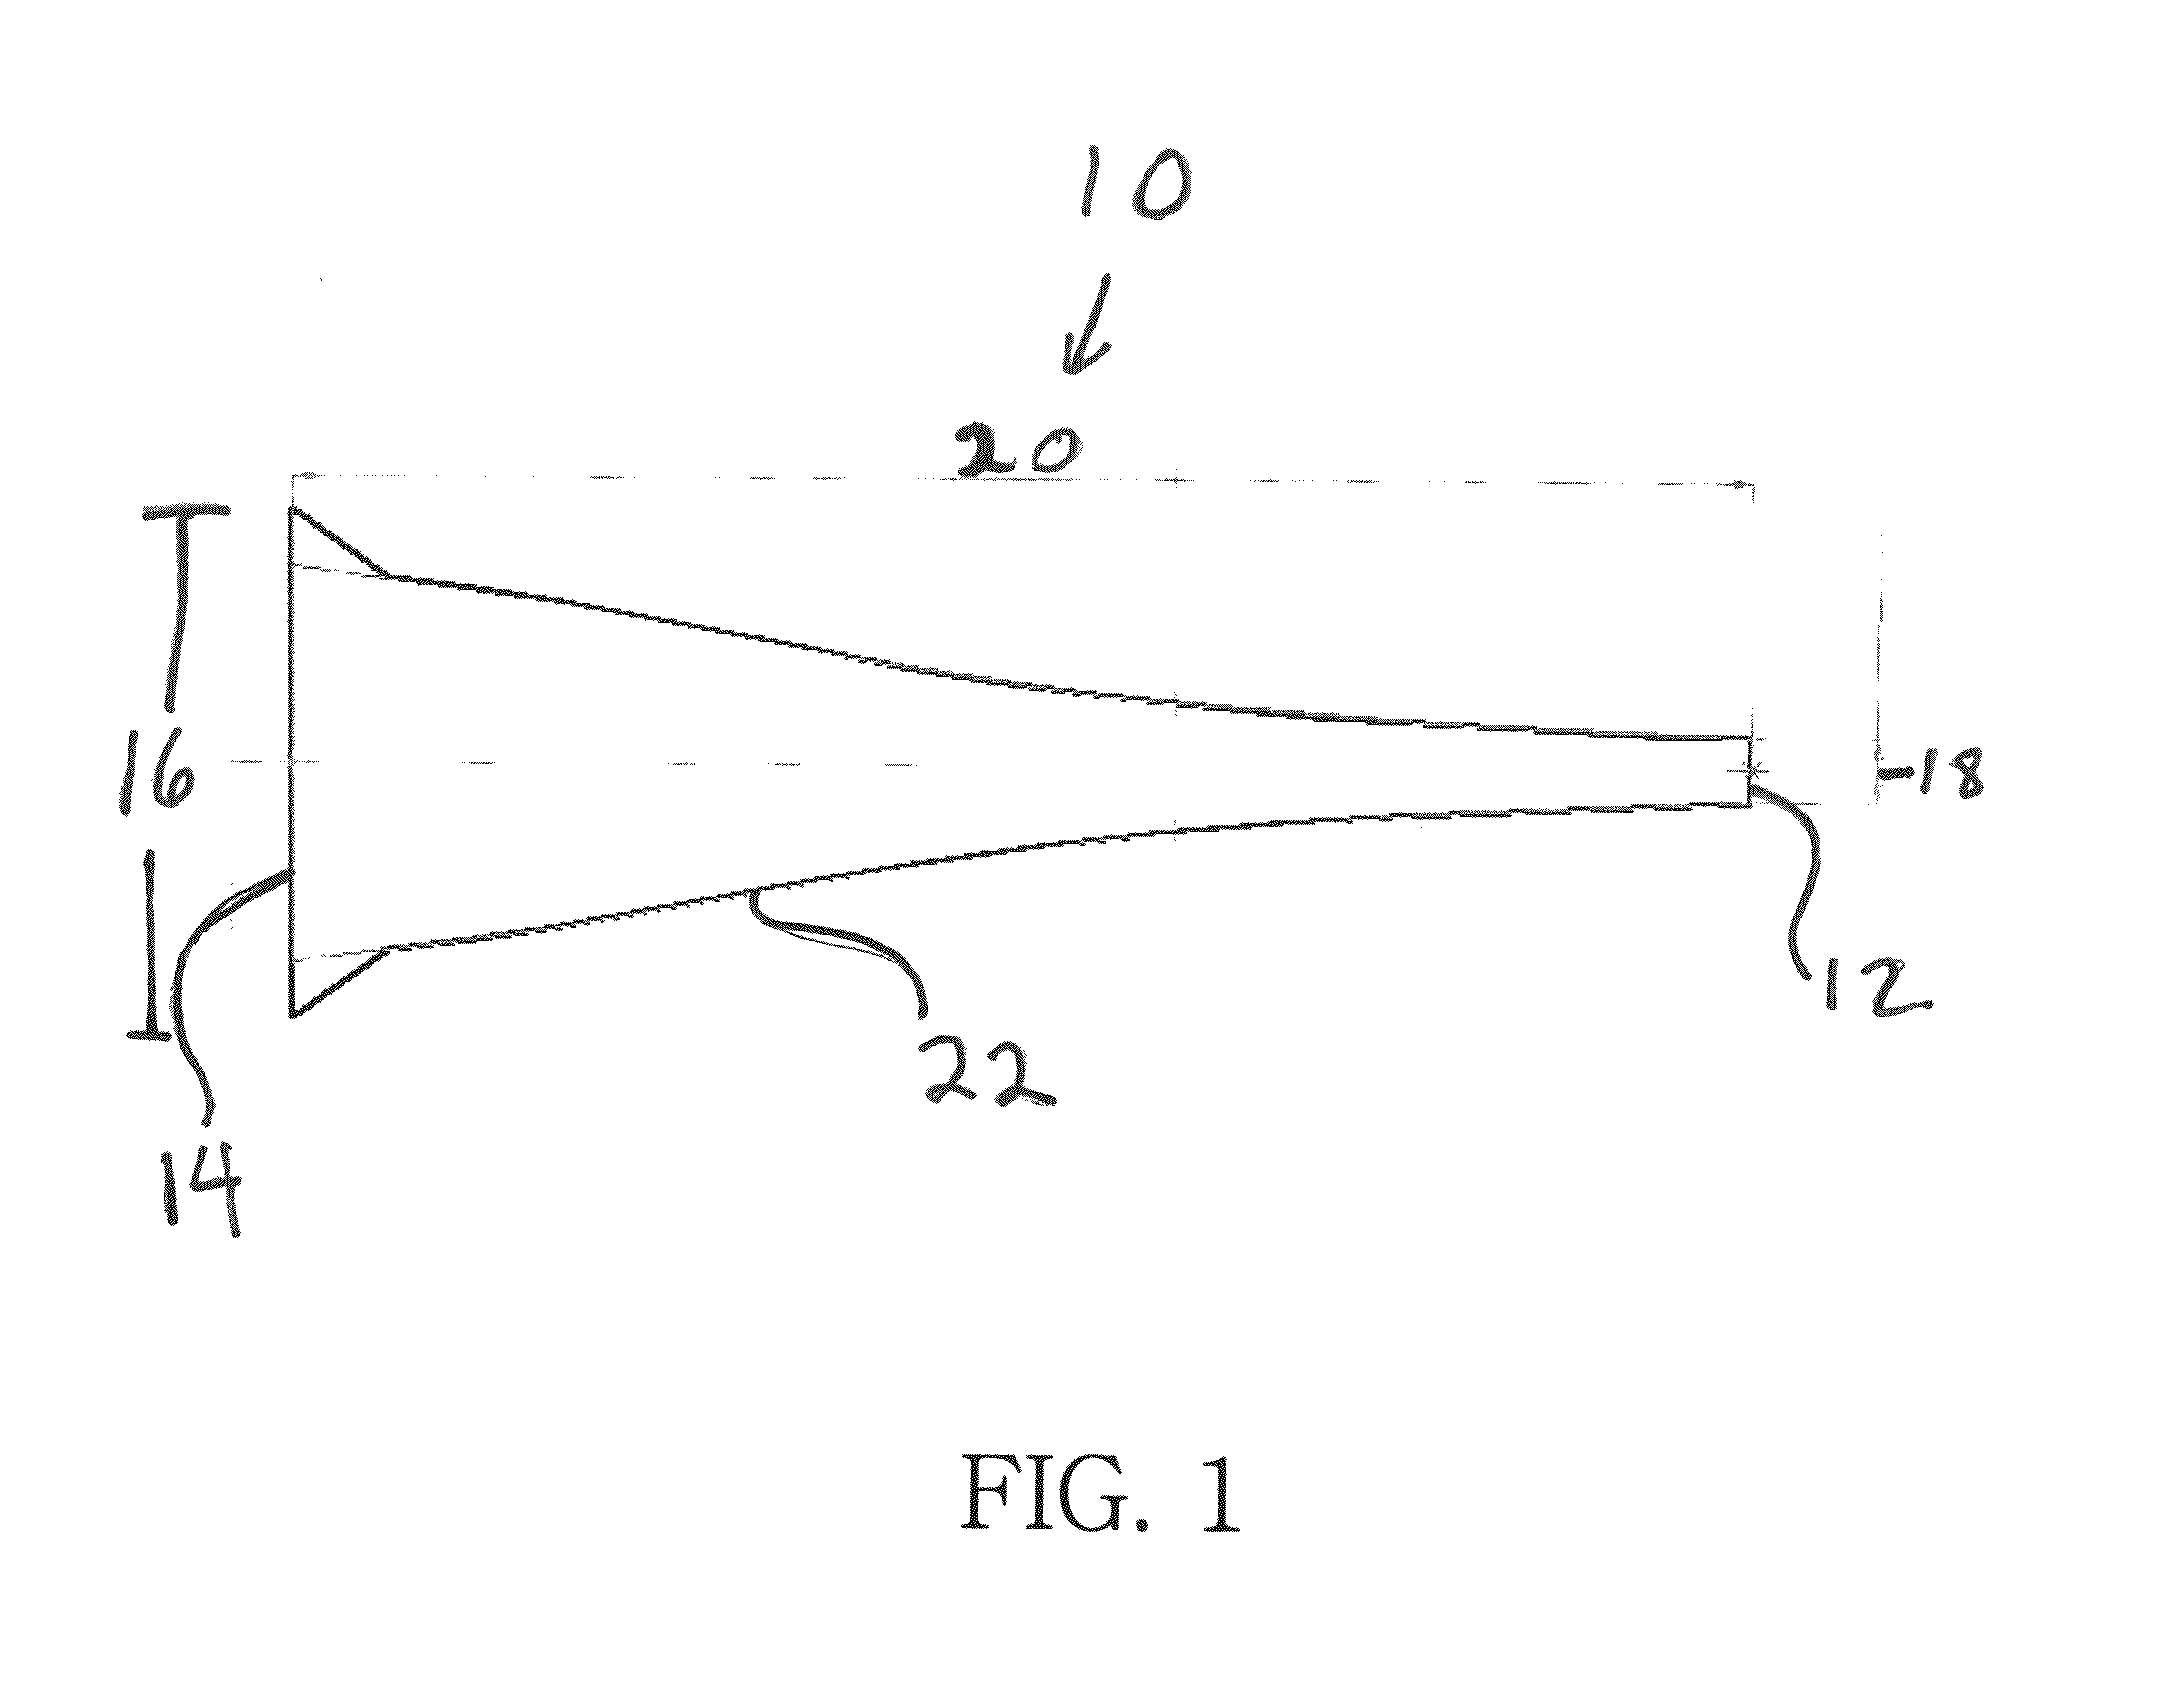 Compact broad-band admittance tunnel incorporating Gaussian beam antennas